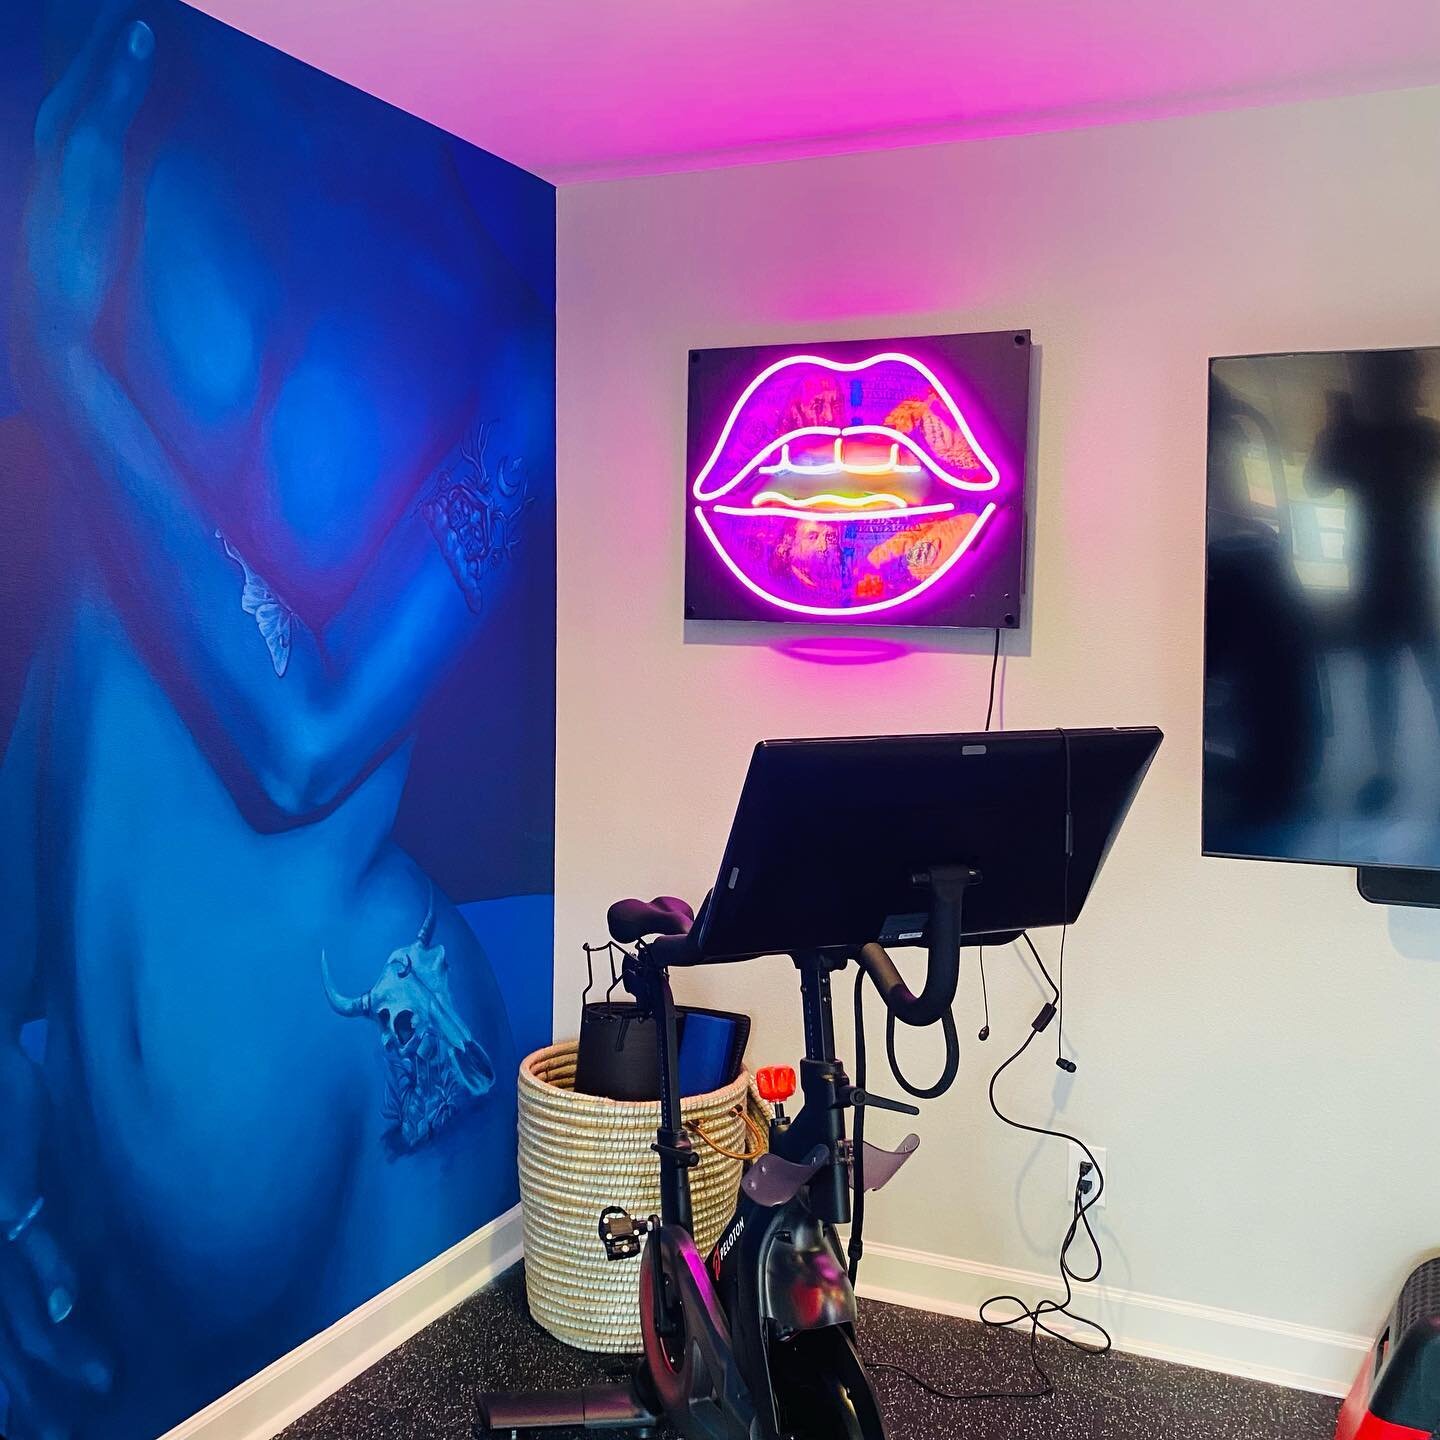 Home gym looking sexy with that neon sign. @theurbanedesign